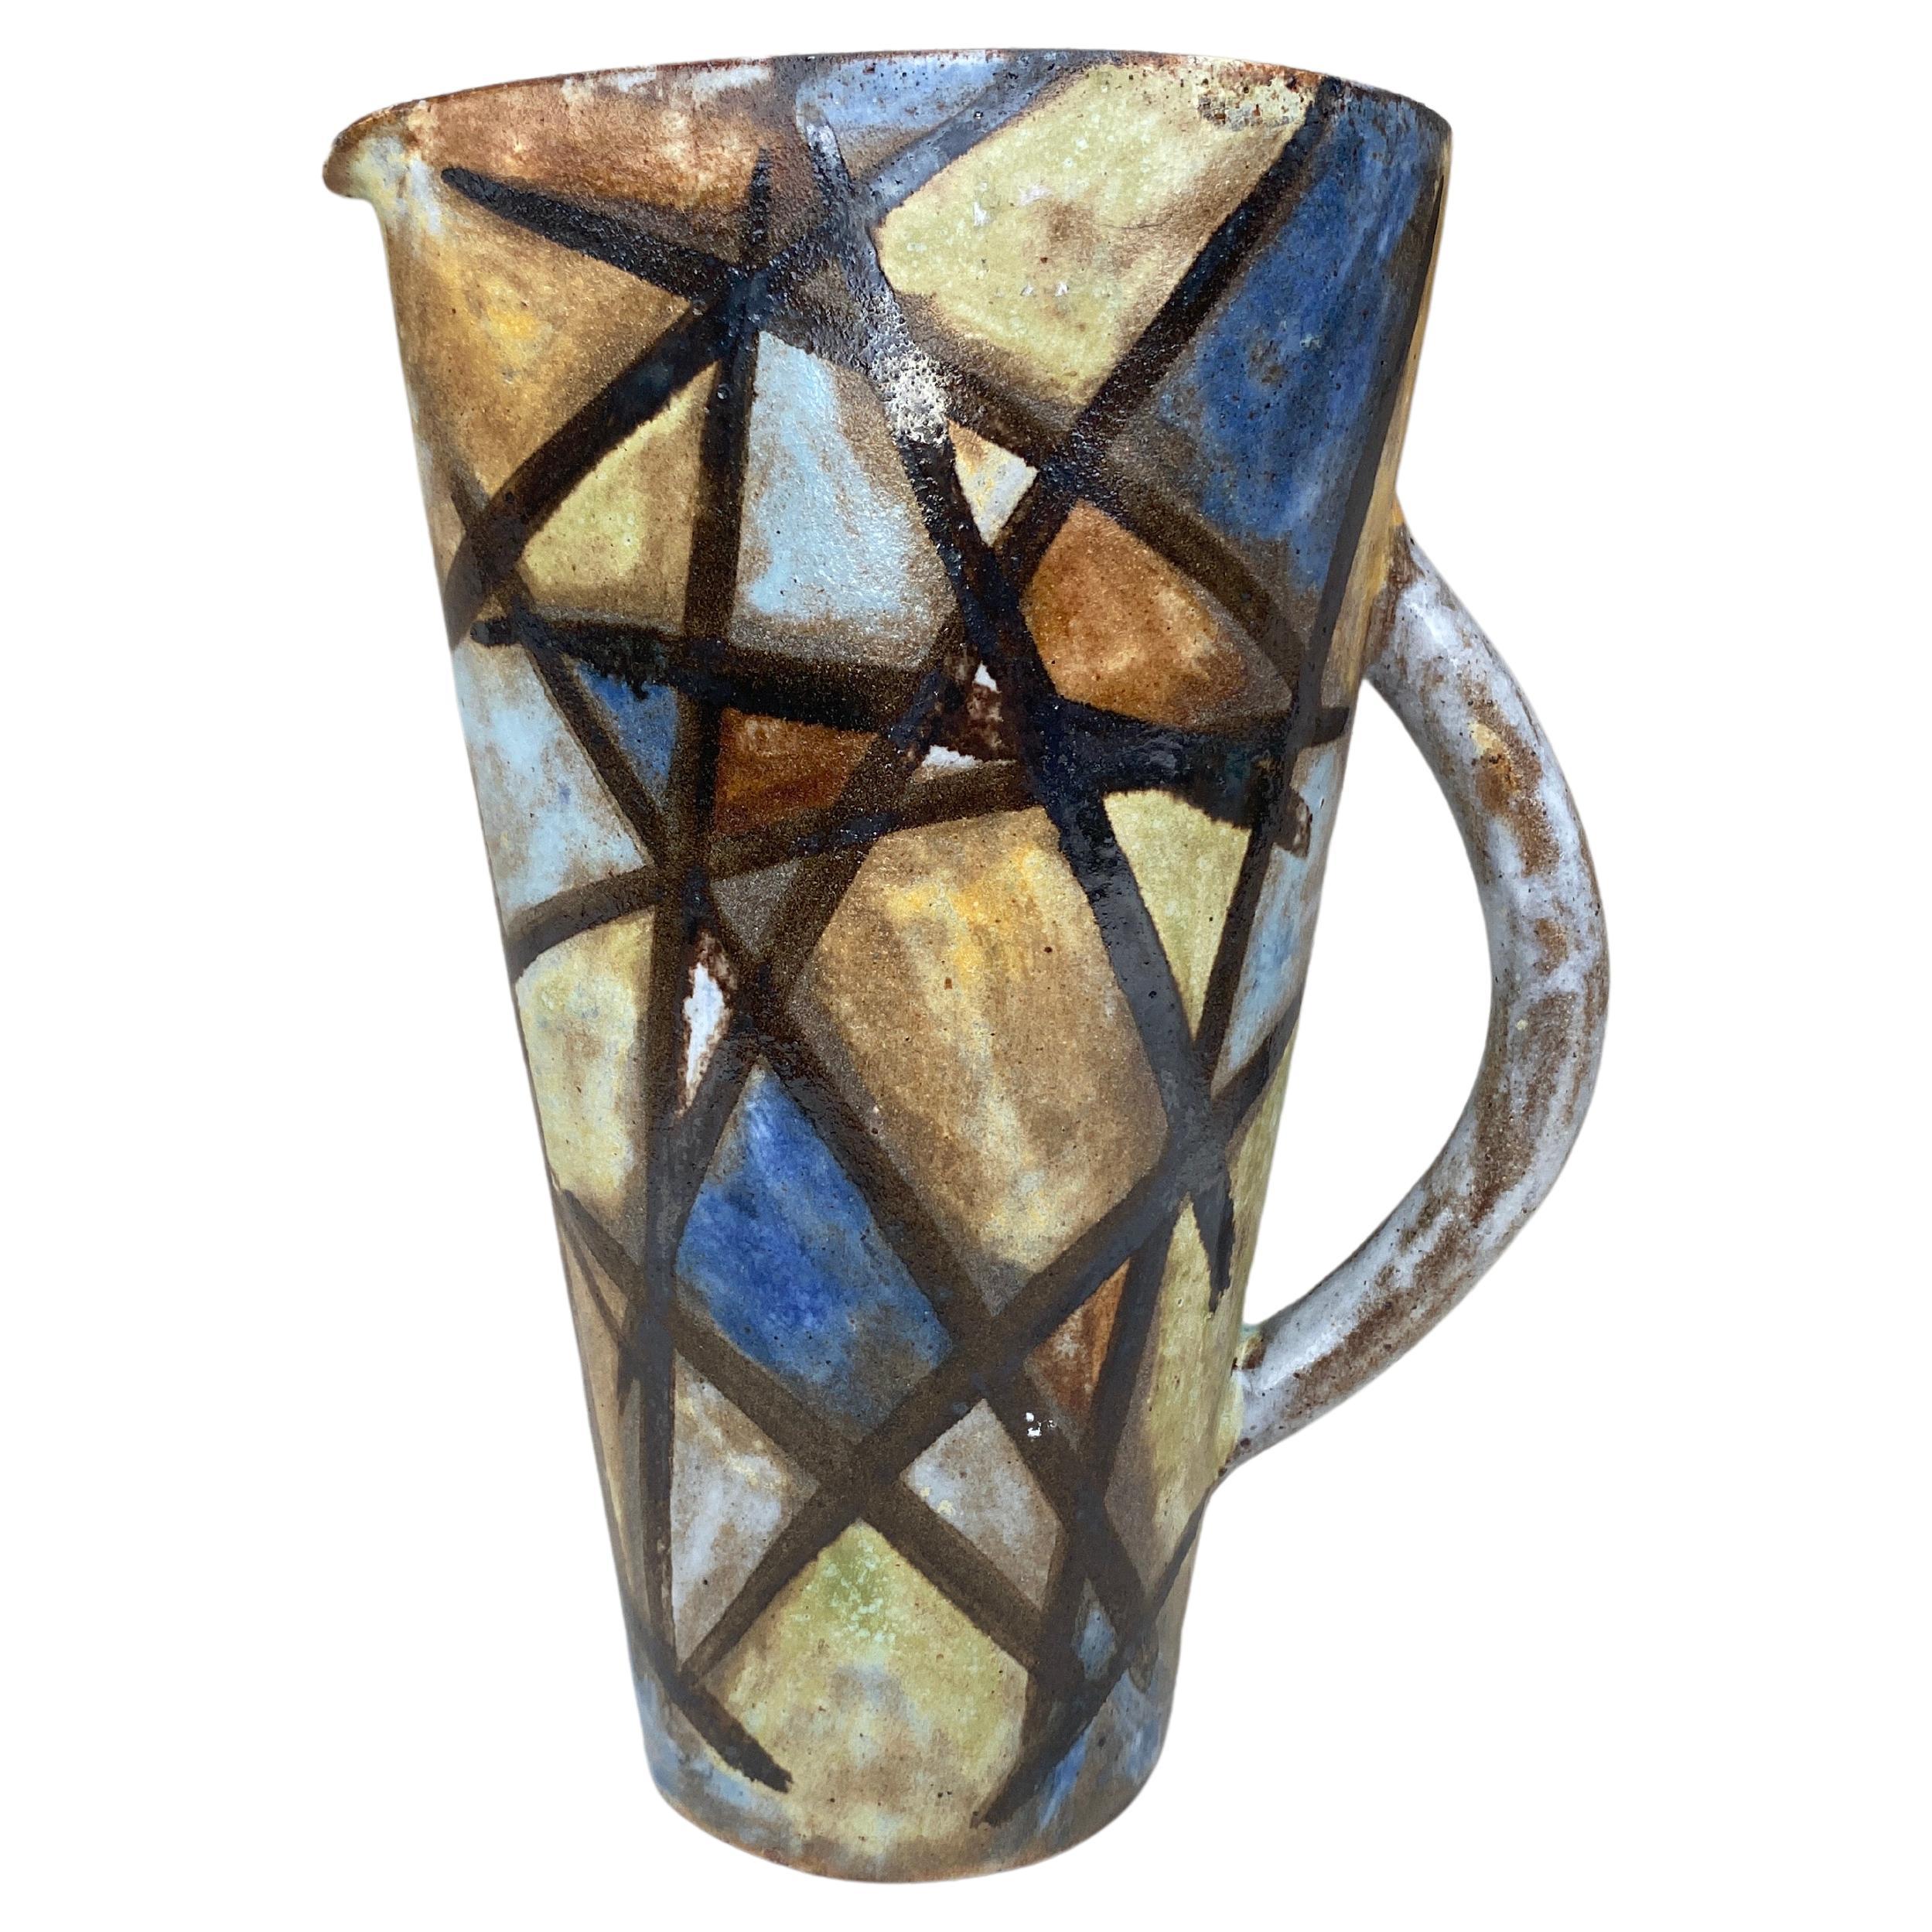 
Mid-Century geometric Abstract pitcher signed Alexandre Kostanda, Vallauris
natural clay and rustic style. Kostanda is also associated with the founding of the Accolay workshops. 
Alexandre Kostanda was an apprentice to Louis Giraud in Vallauris,